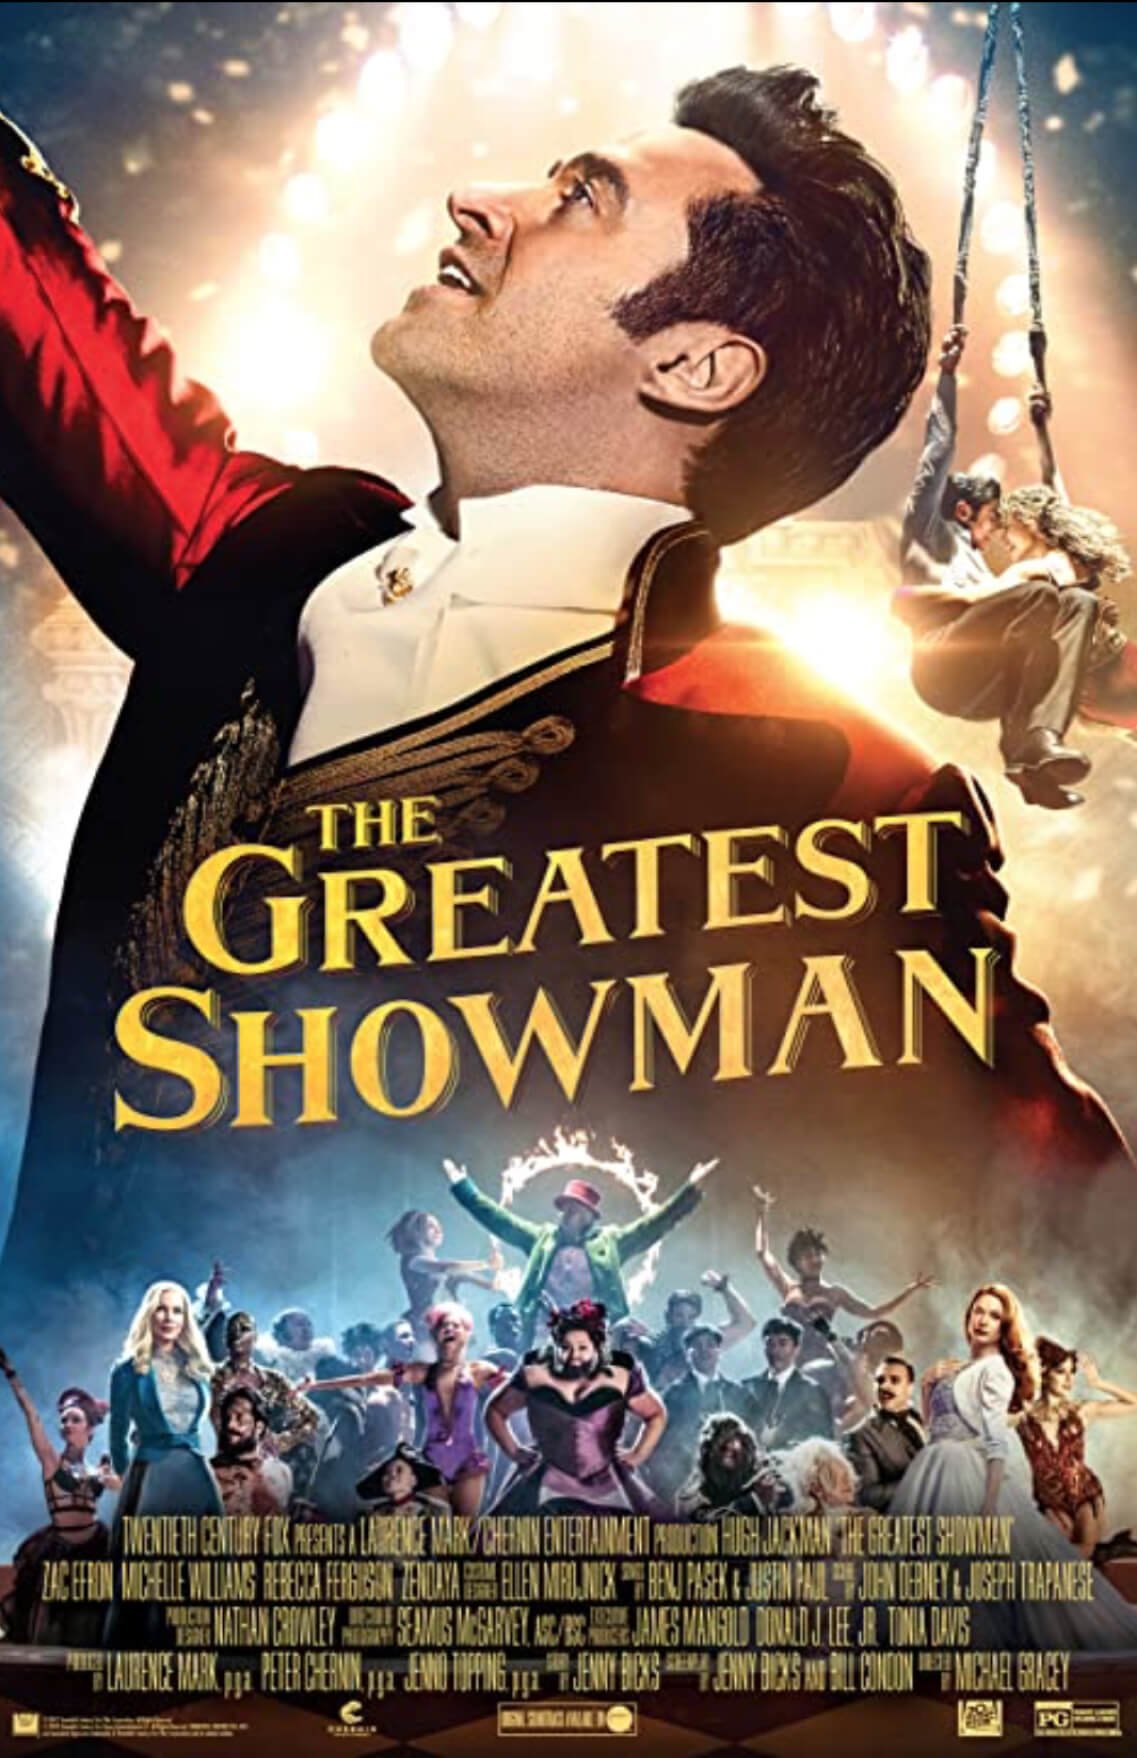 The Greatest Showman | 200 Team members served